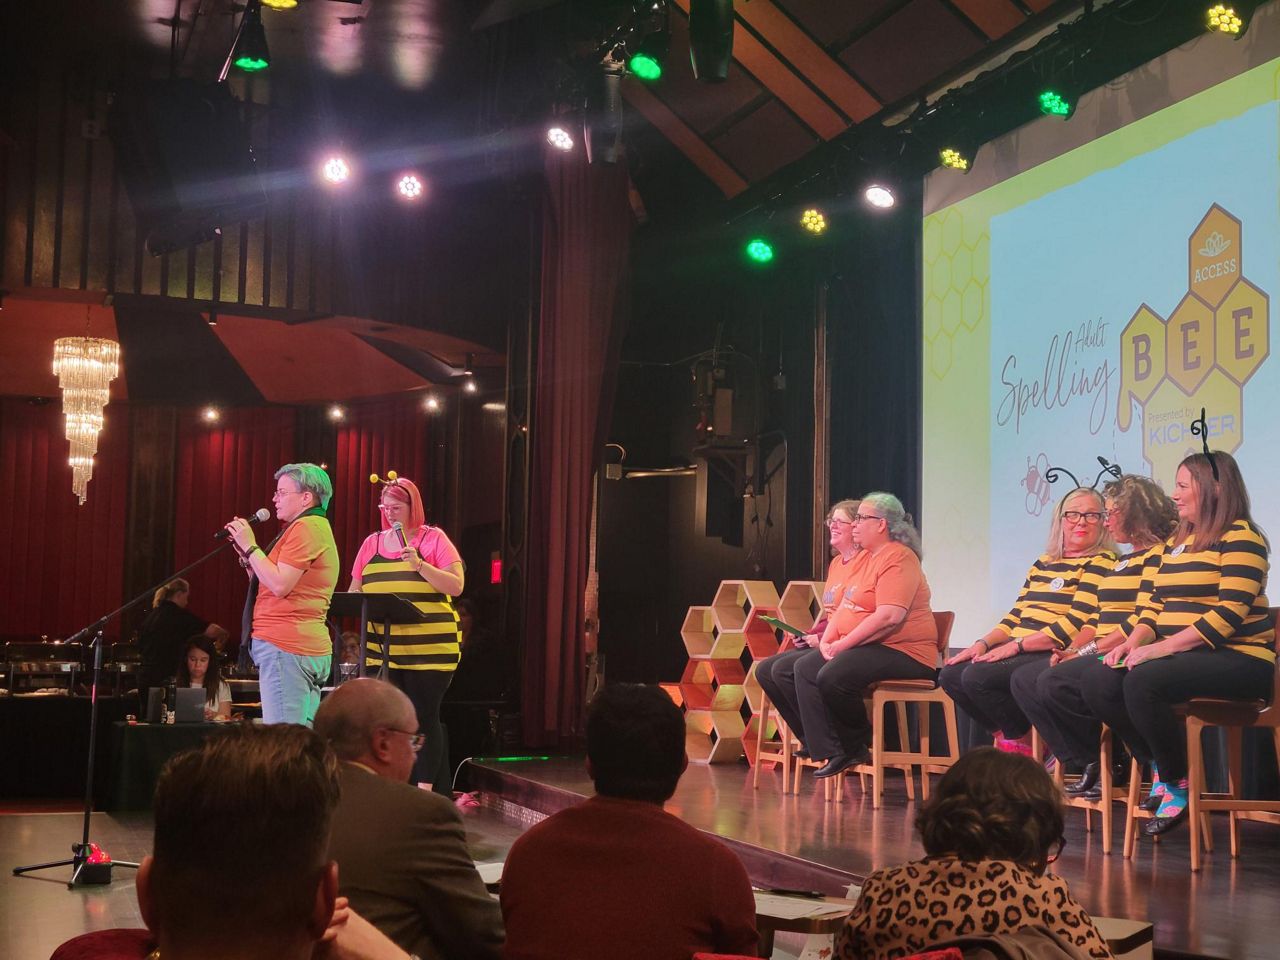 ACCESS, Inc., held its inaugural Adult Spelling Bee fundraiser on Saturday, October 14. ACCESS is a shelter for women and children in Akron. (Photo credit: Tonya Strong-Charles)